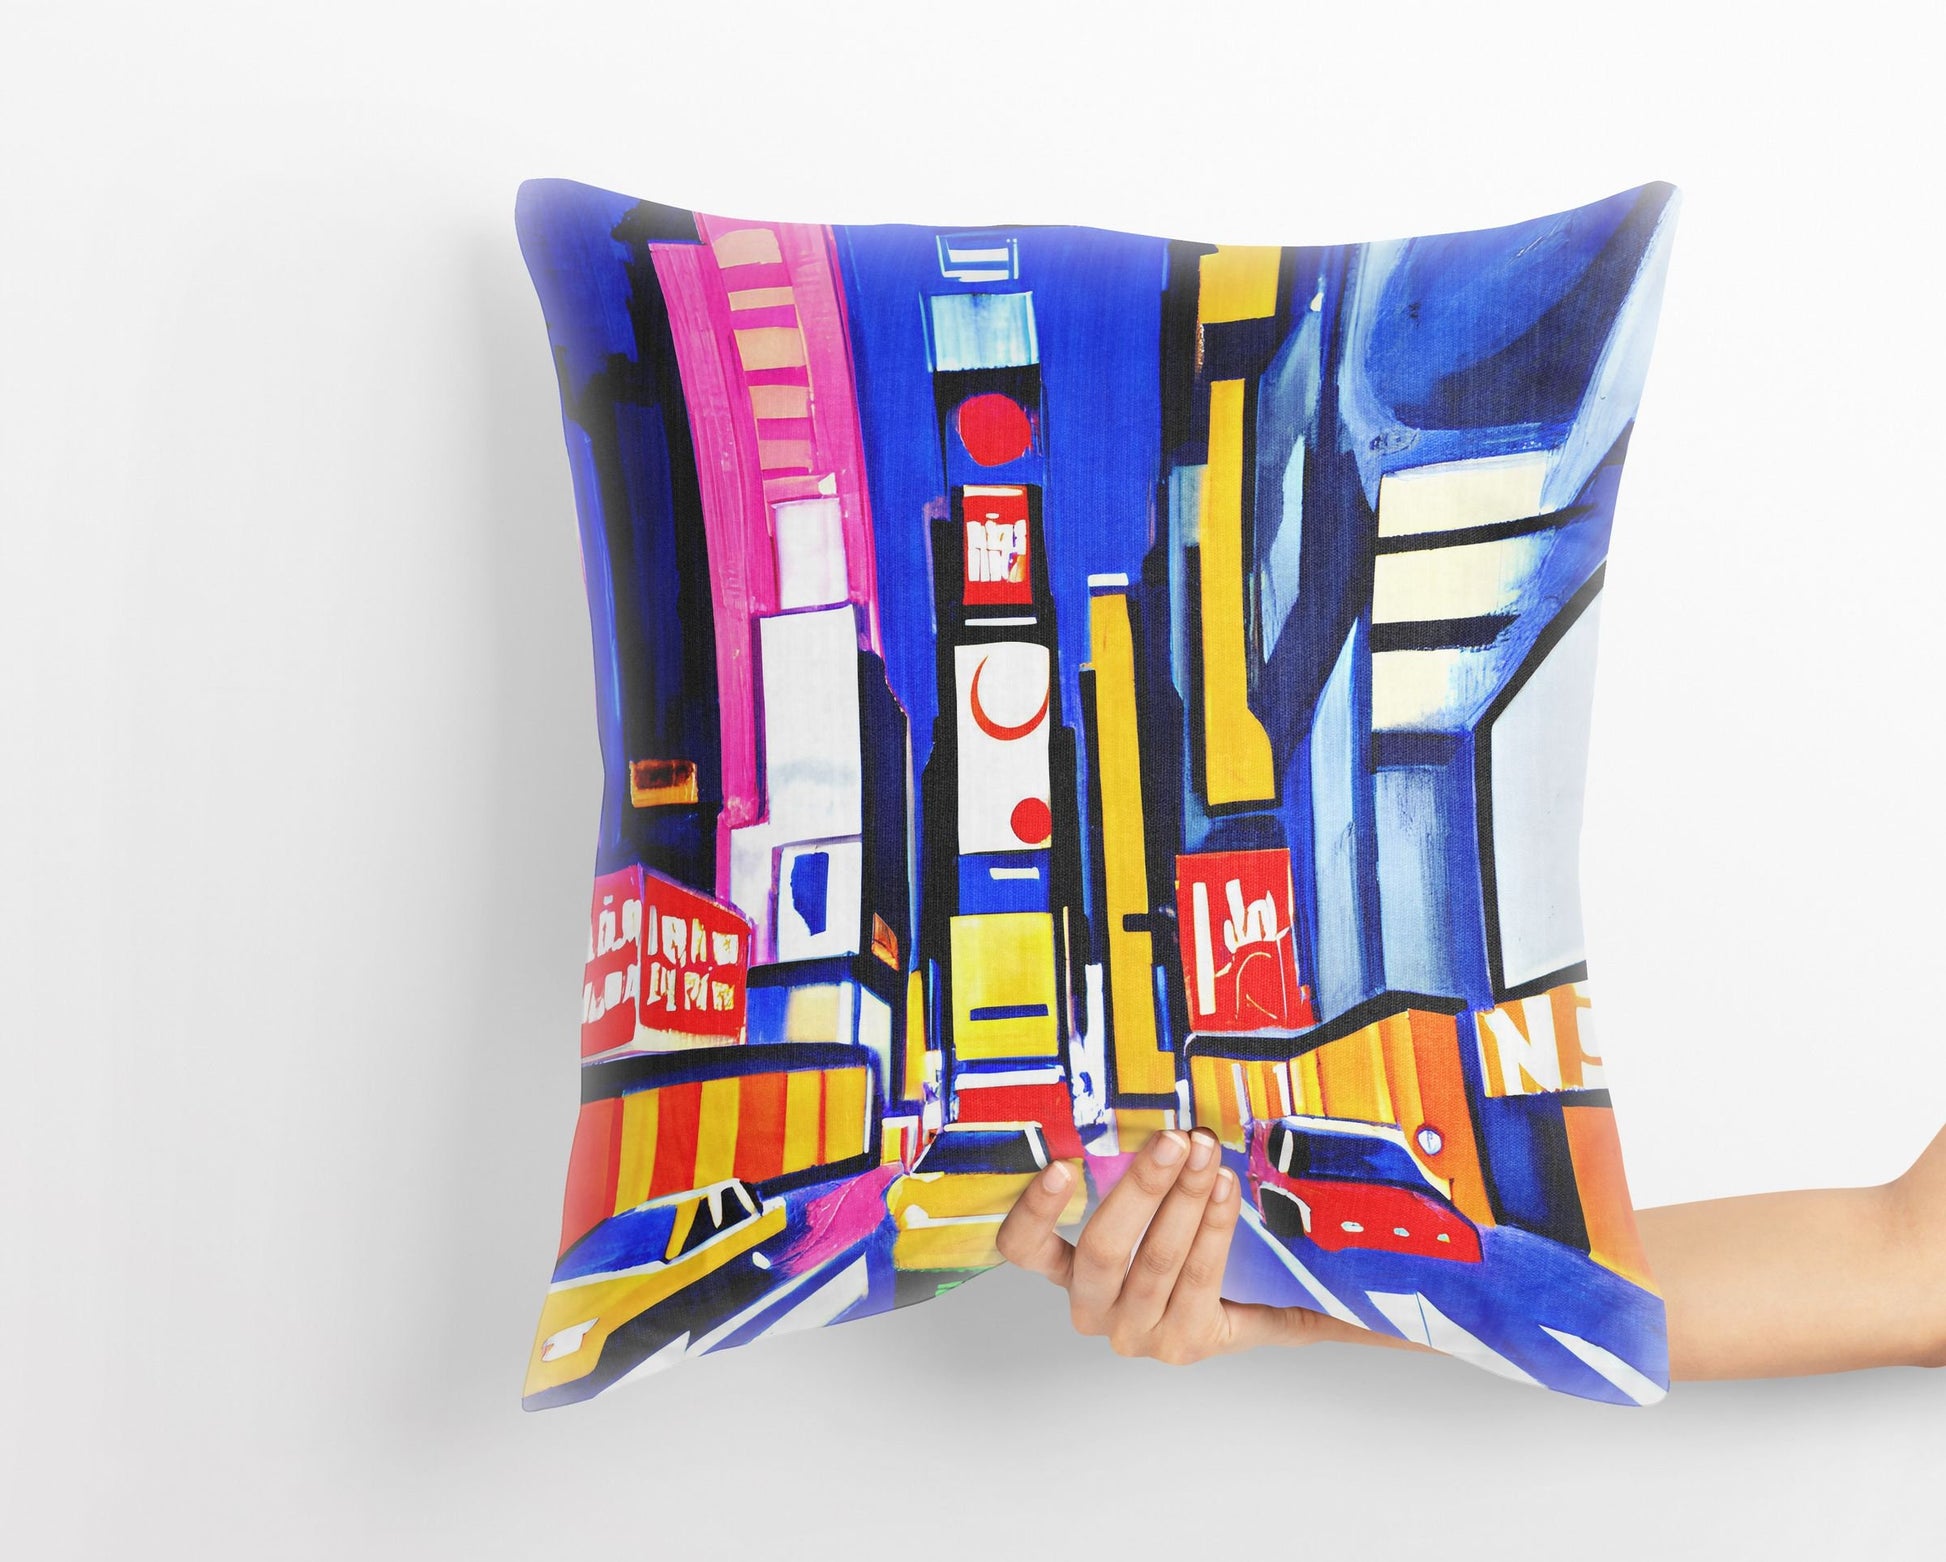 New York Times Square At Night, Throw Pillow Cover, Cat Pillow, Soft Pillow Cases, Colorful Pillow Case, Home And Living, Sofa Pillows